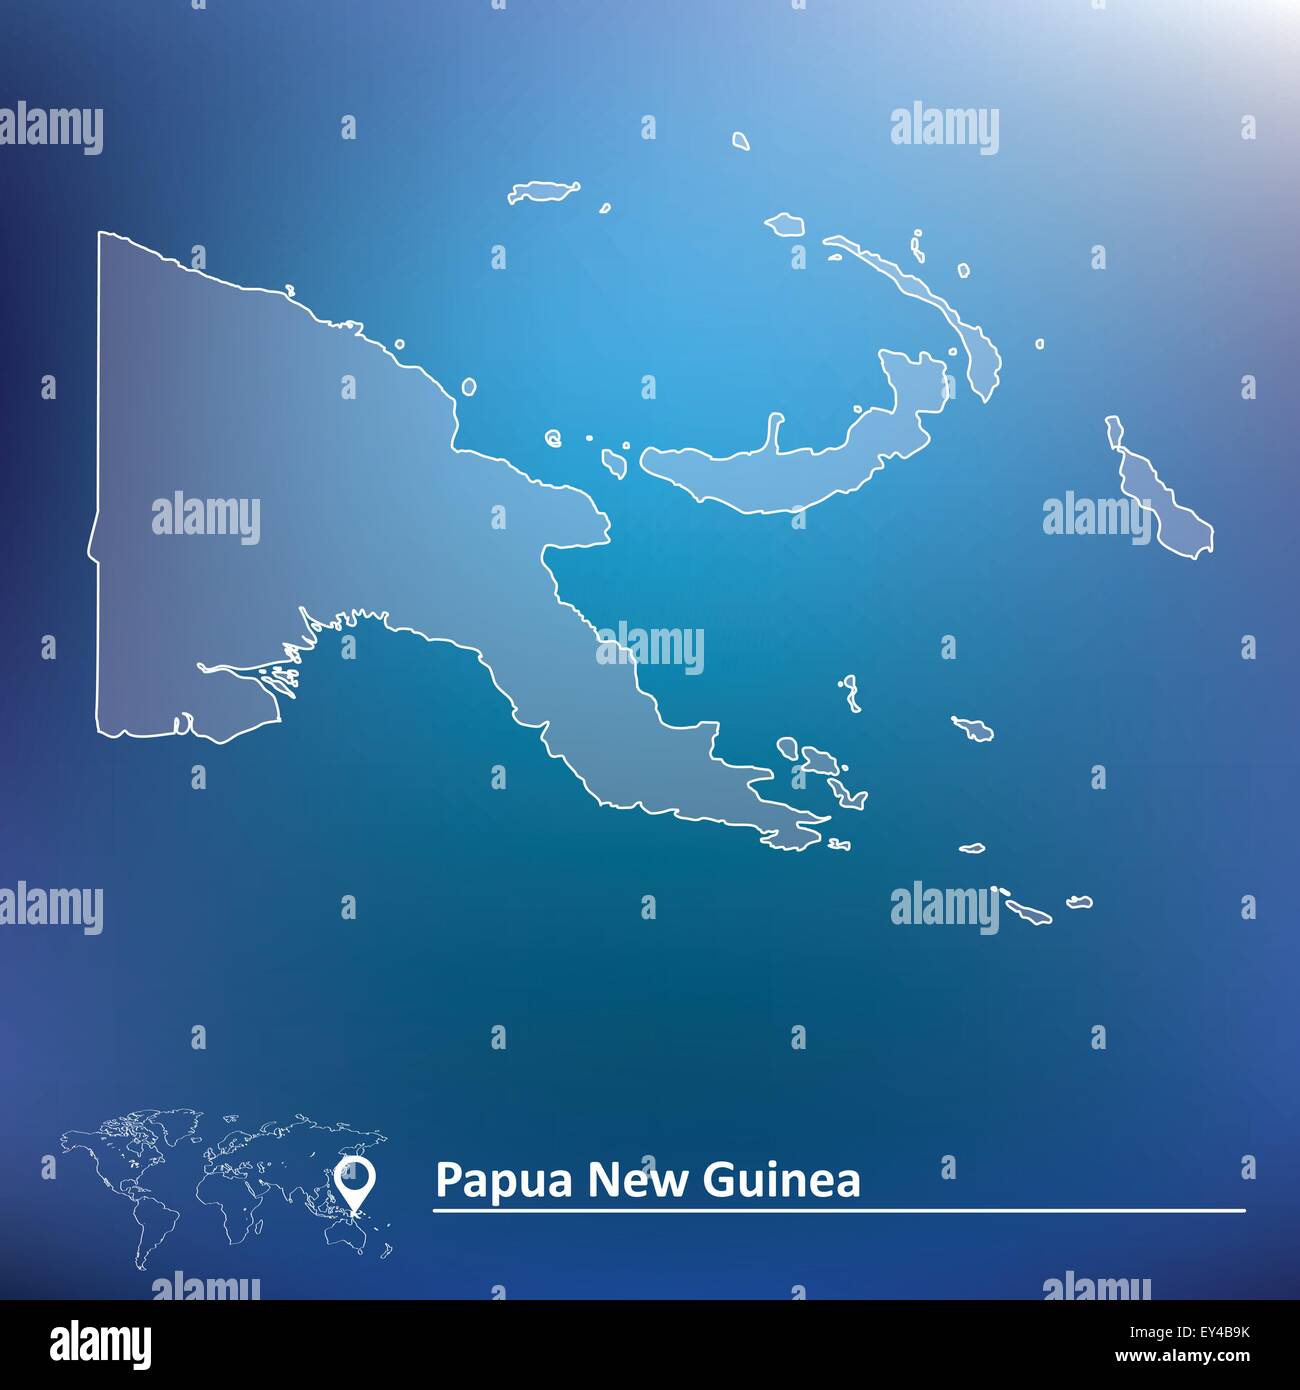 Map of Papua New Guinea - vector illustration Stock Vector